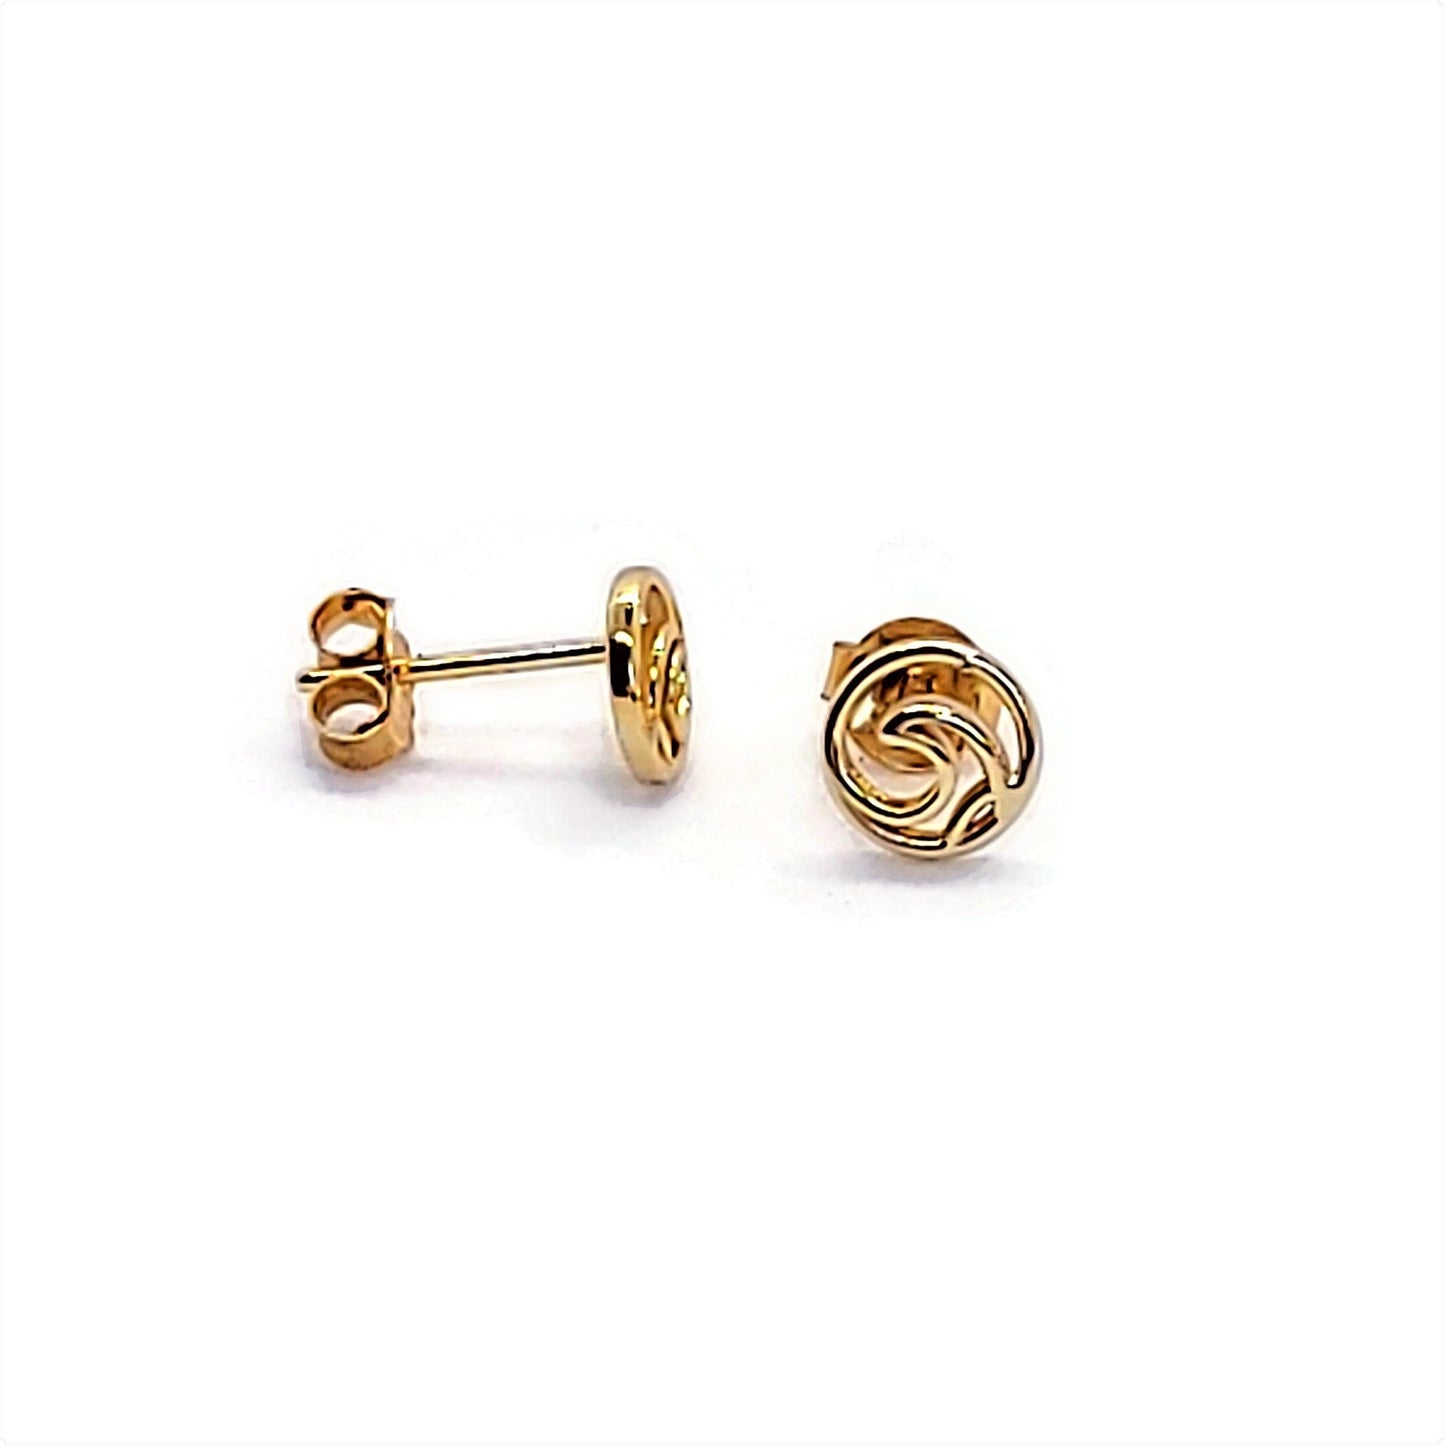 circle stud earrings, 18k gold plated silver circle surf wave stud earrings with side view